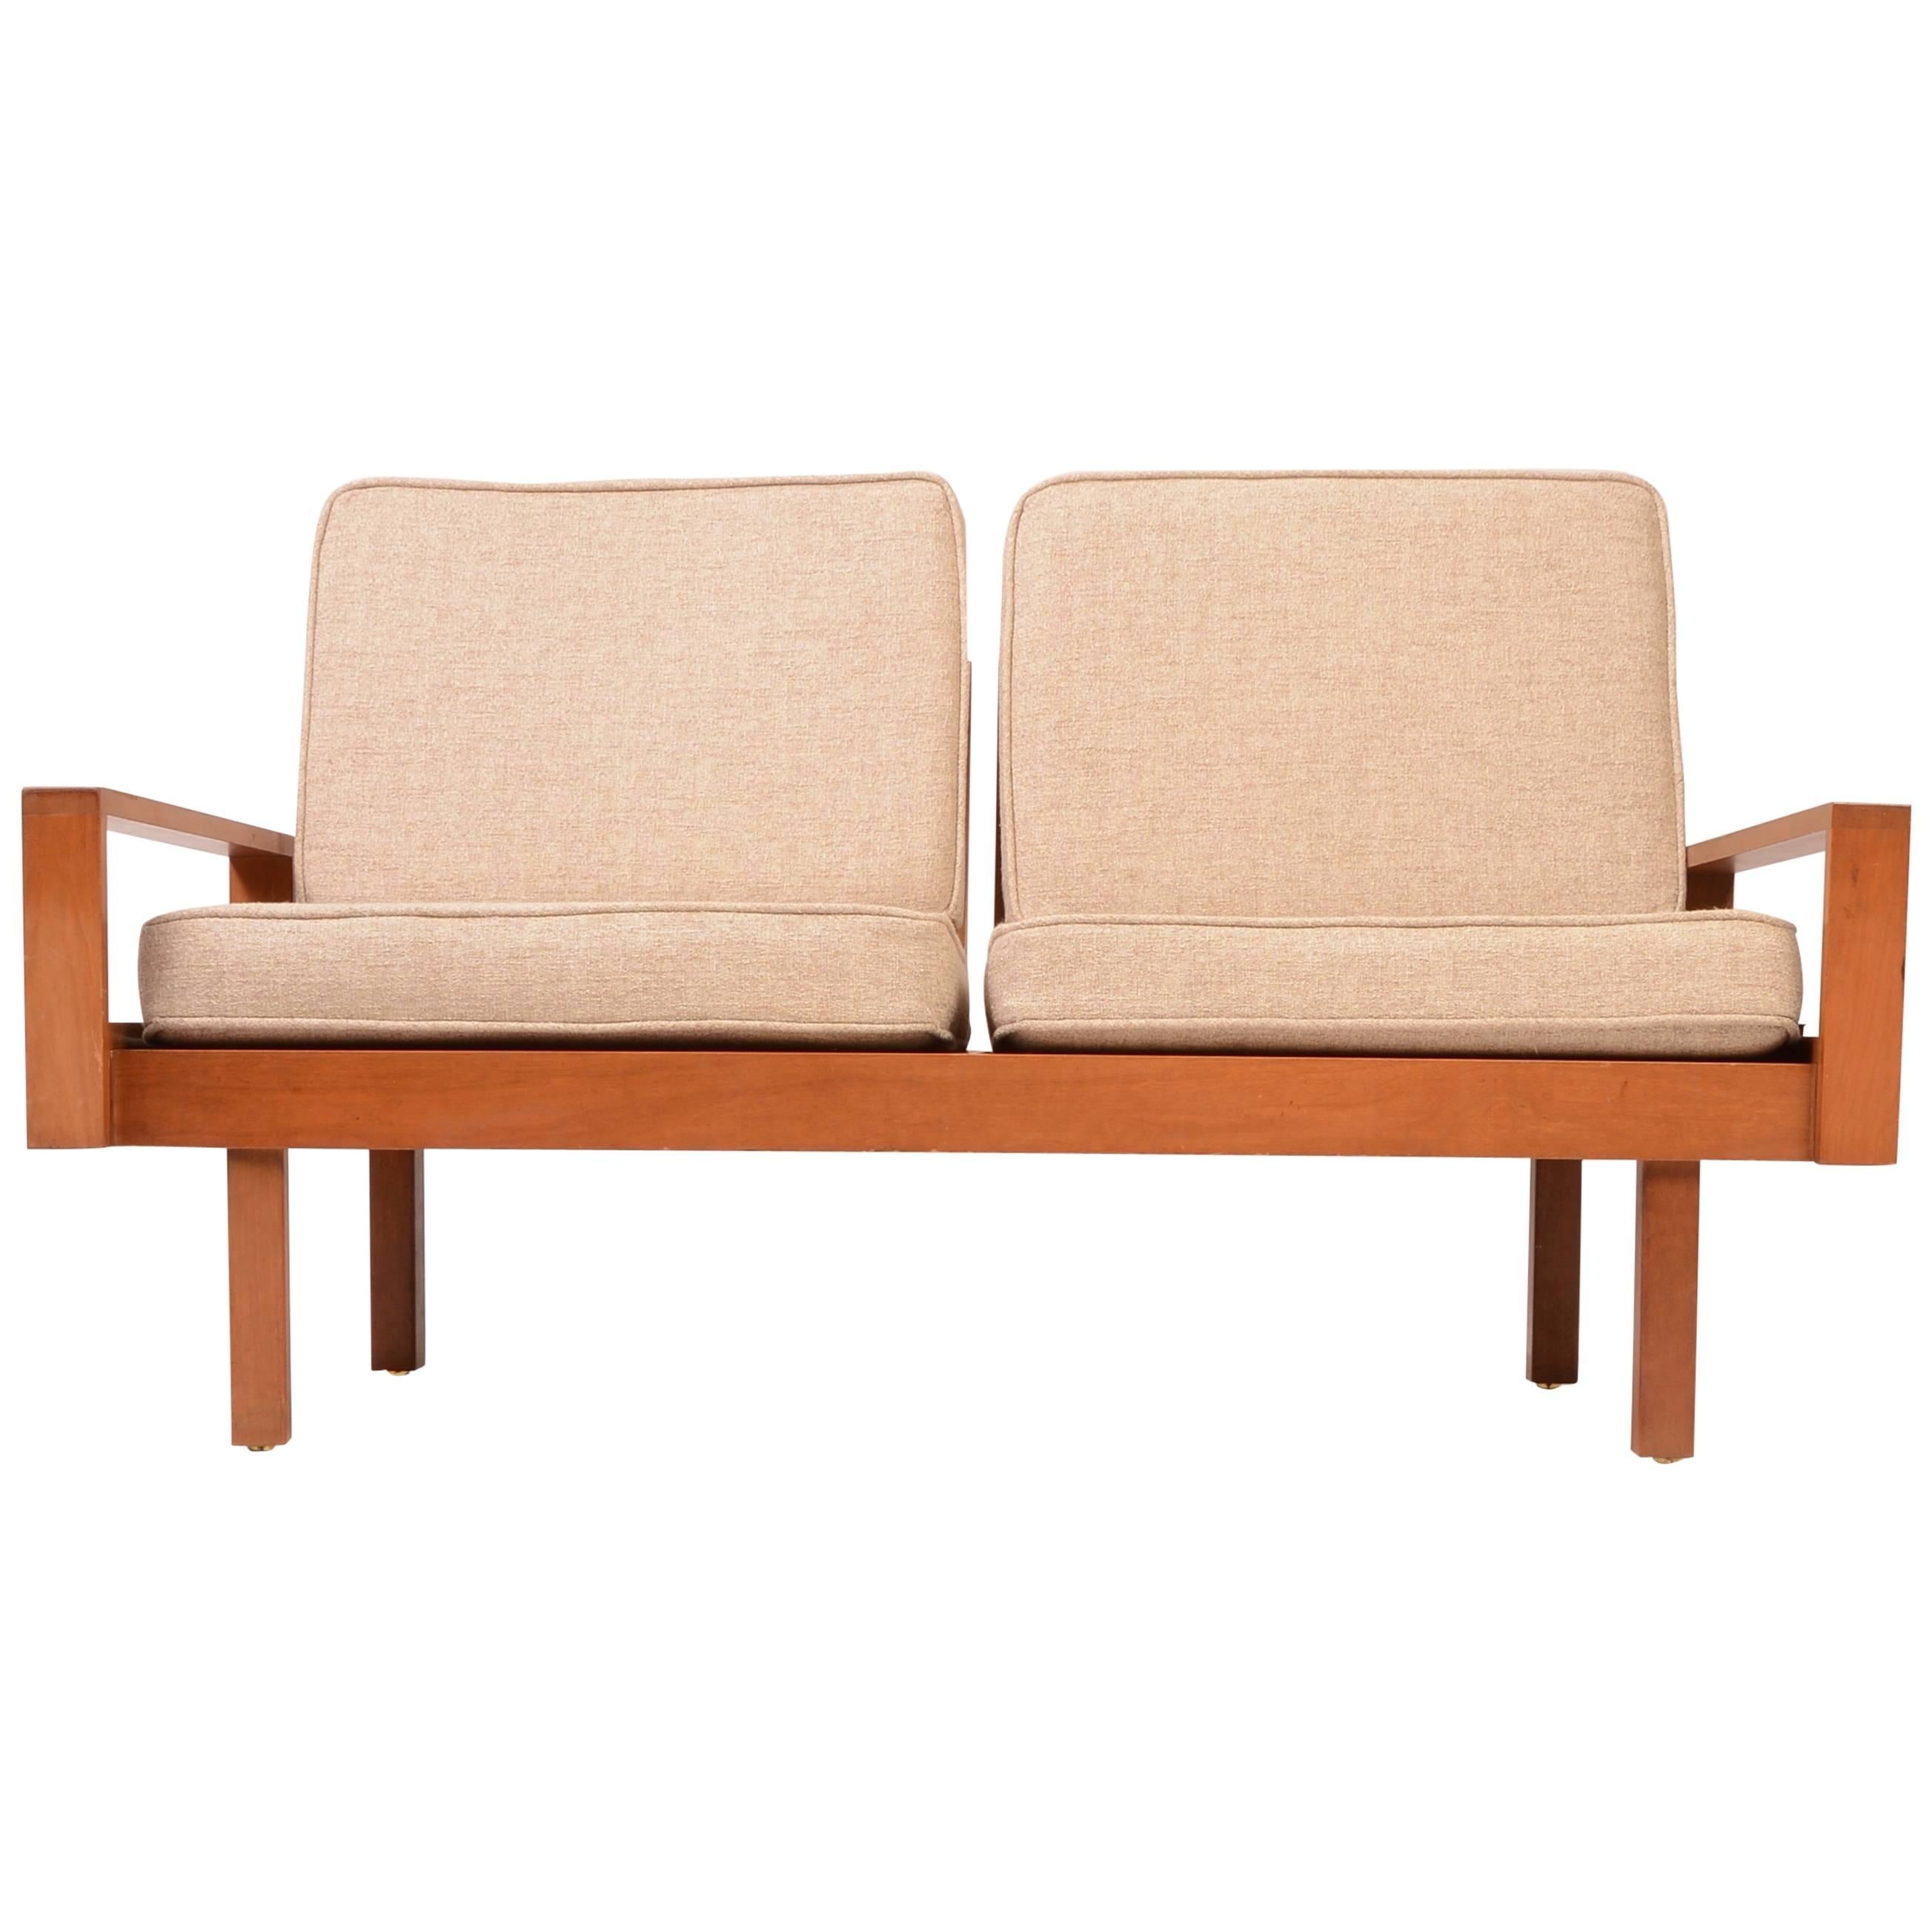 Chair by Martin Borenstein for the Brown & Saltman Modular Living Room System